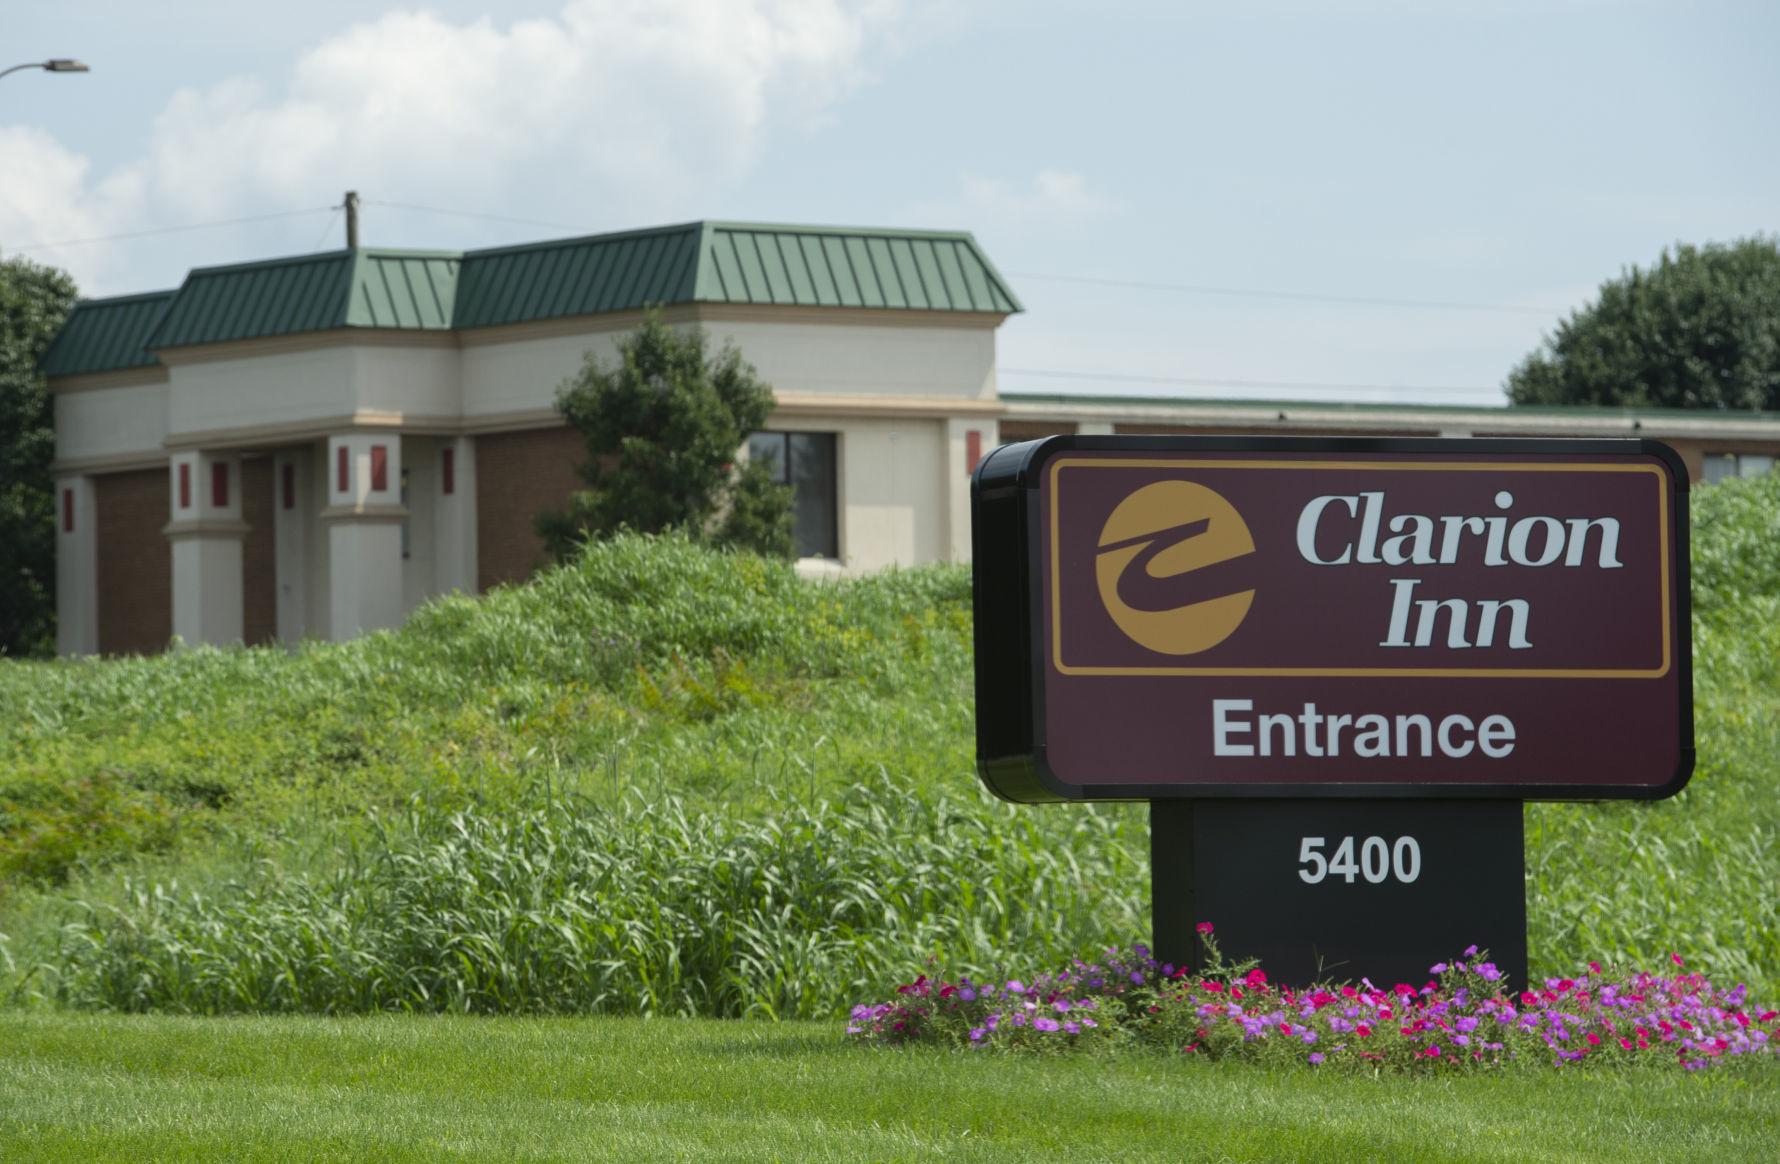 Clarion Inn near Frederick eyed for off-track betting site ...